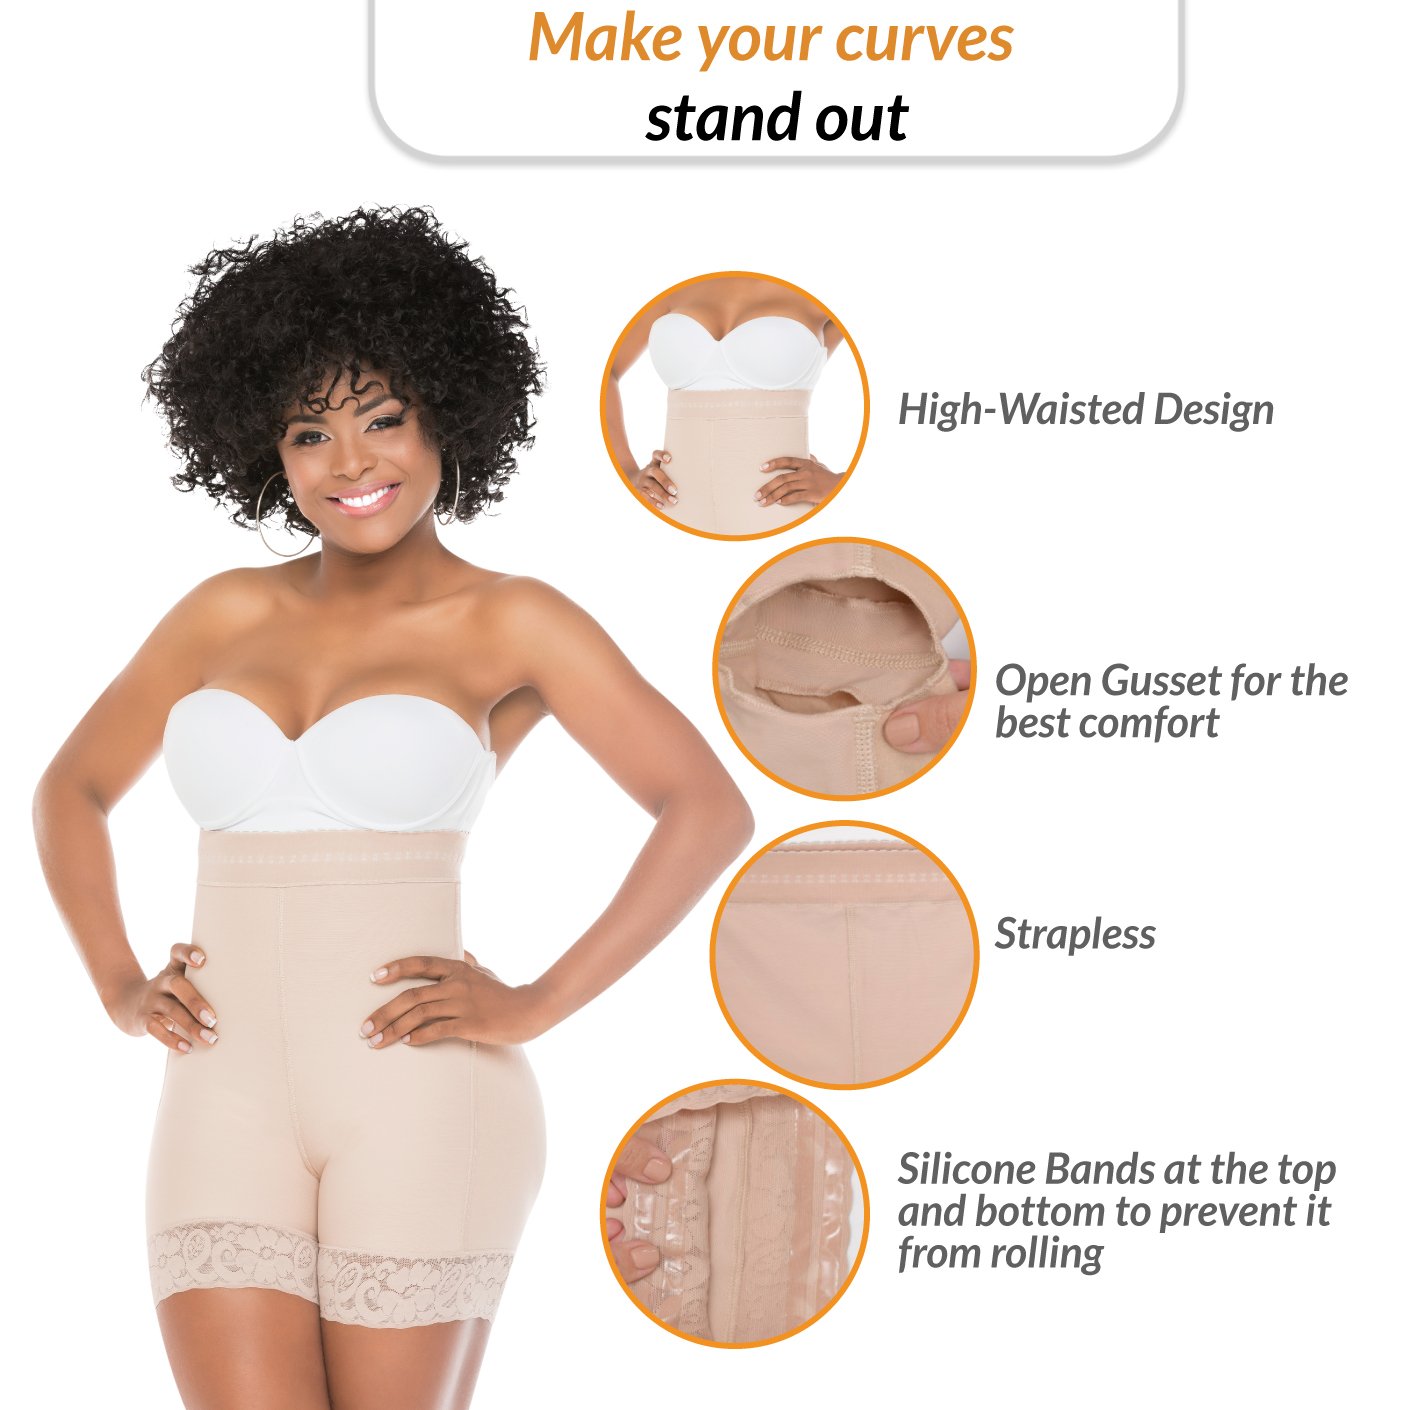 Fajas Salome 0412 | Strapless Butt Lifting Shapewear Girdle for Dresses |  Daily Use Body Shaper